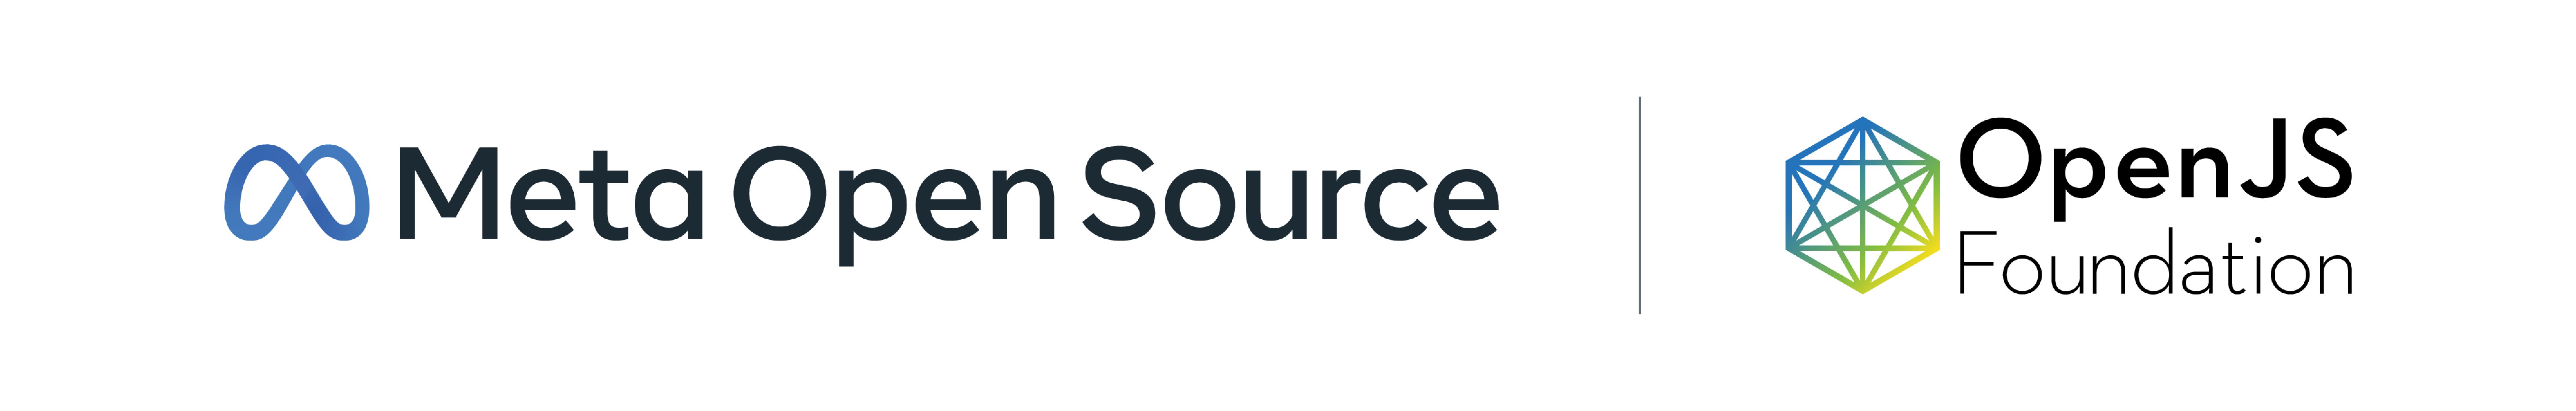 Banner image for Meta Open Source and OpenJS Foundation